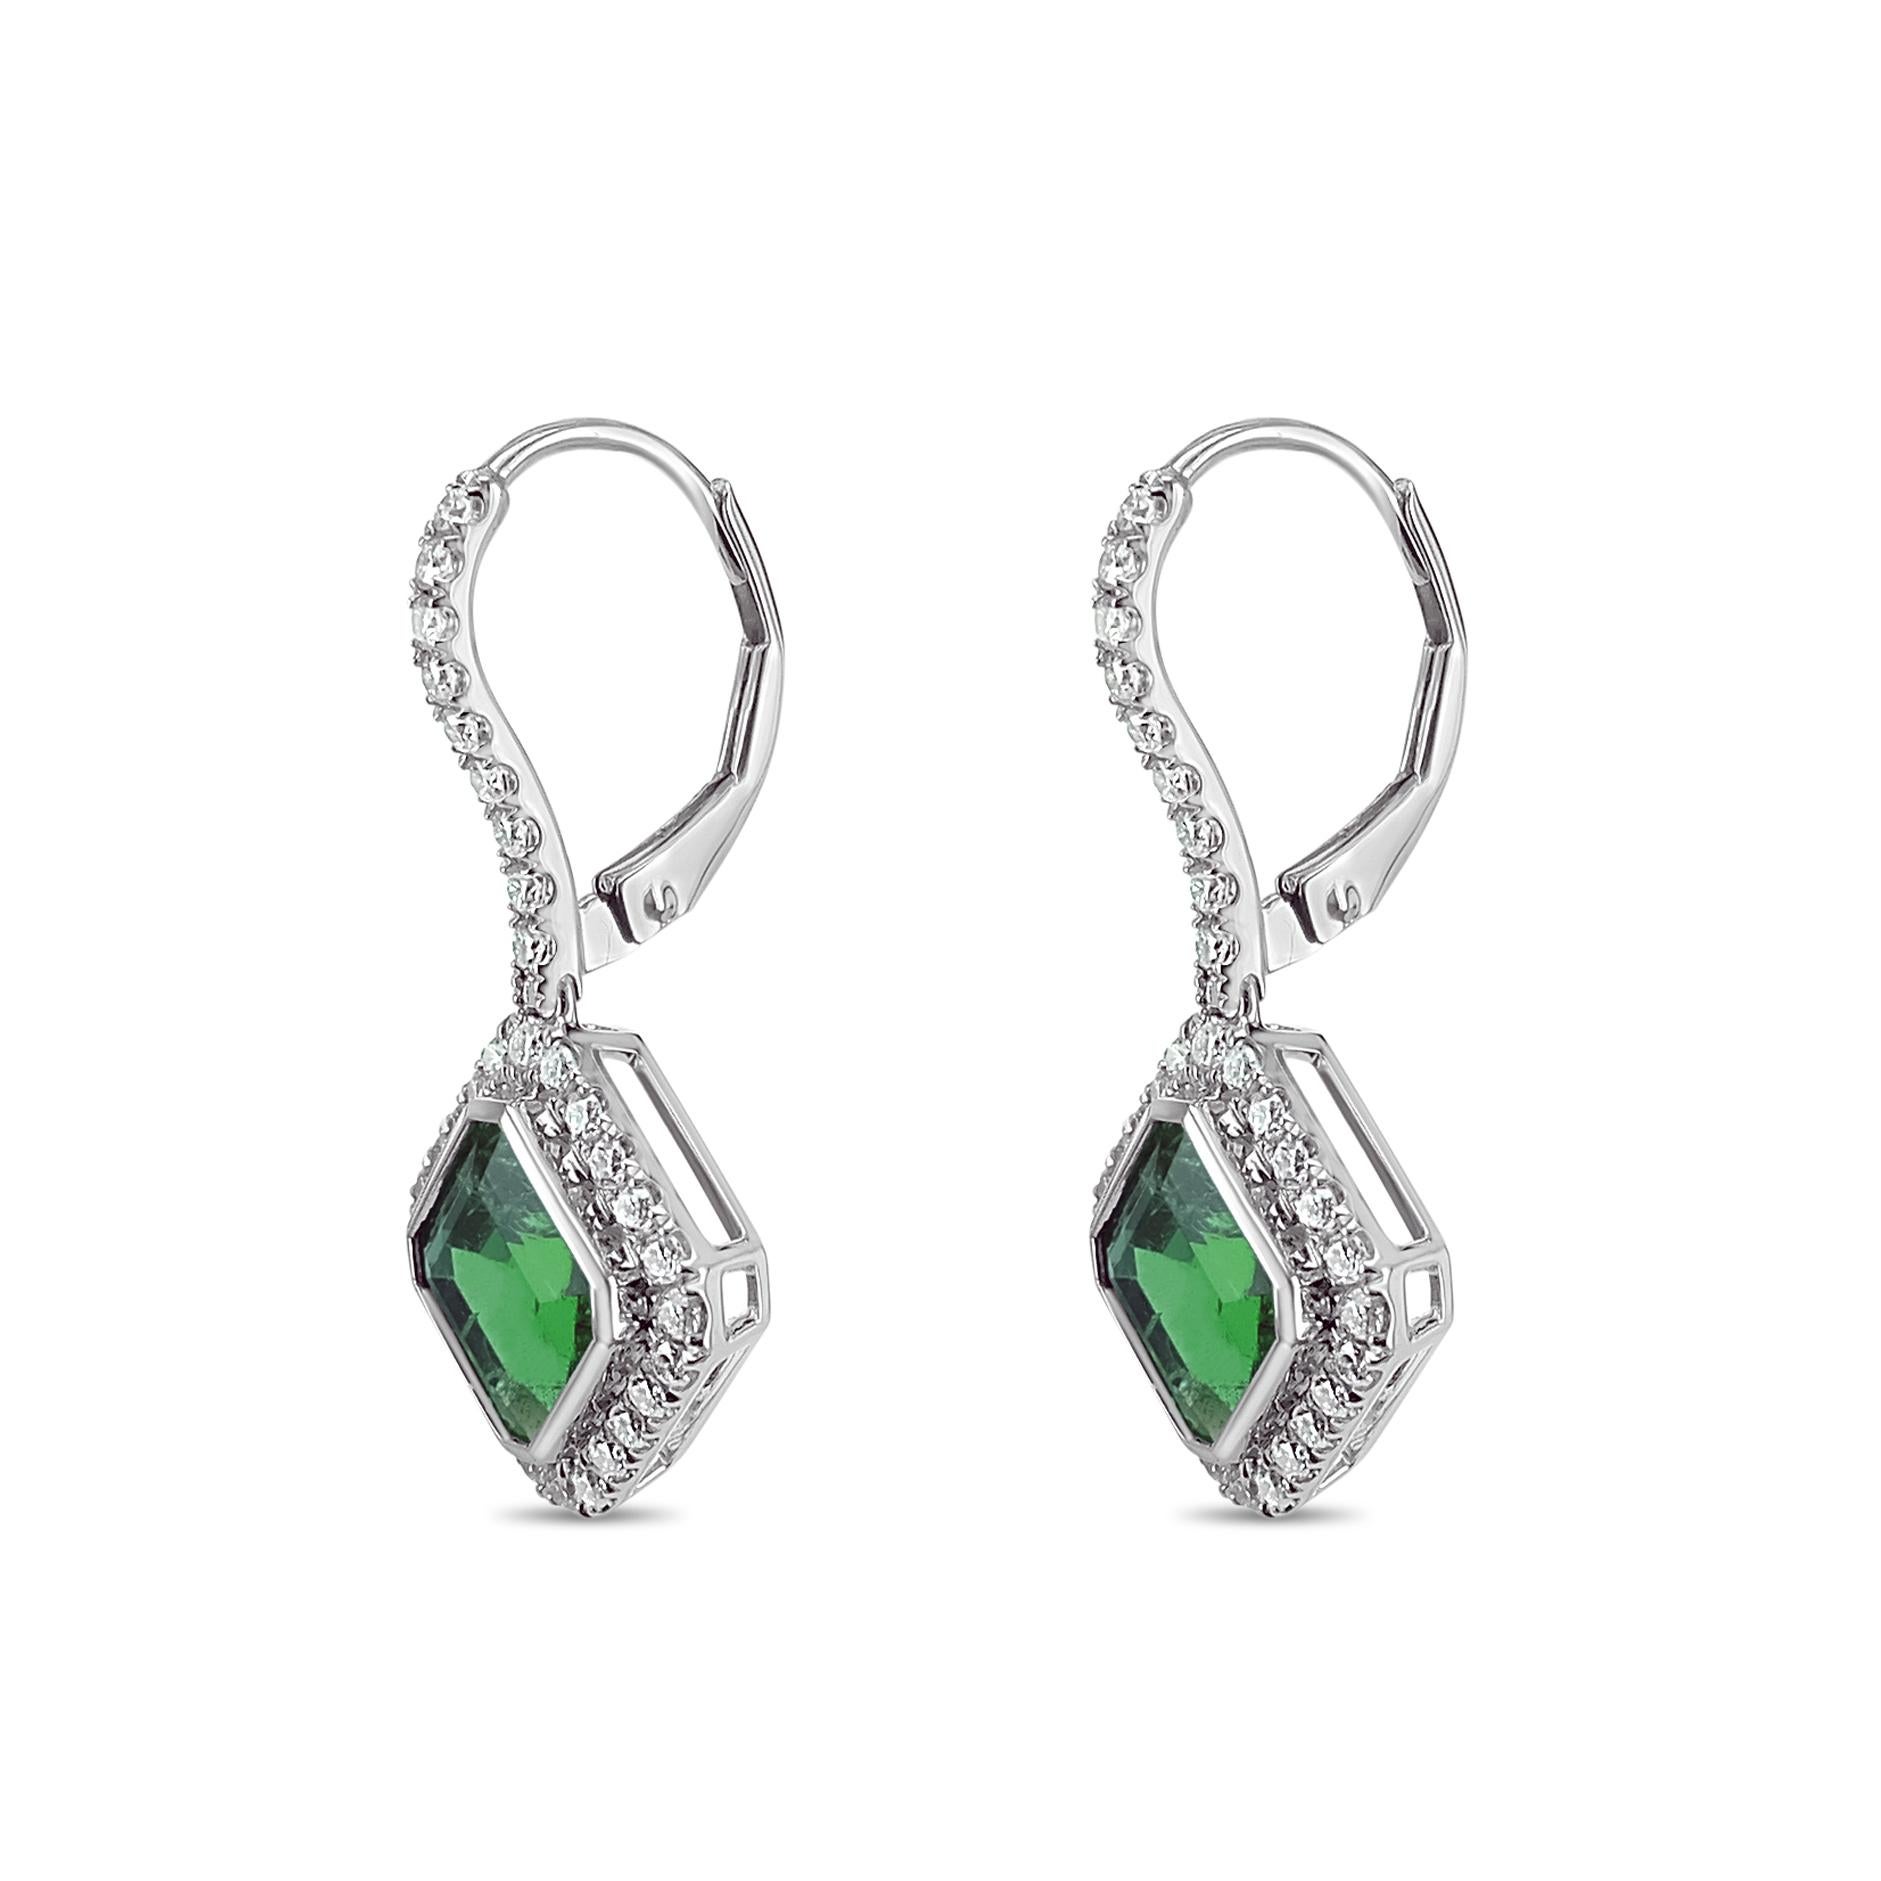 NGTC Certified 3.73 Carats of Green Emeralds of Zambia are set with 0.60 carats of white brilliant diamond. The emeralds studded are VS clarity and are rare to find in such clarity from Zambian mines.
The details of the diamond are mentioned